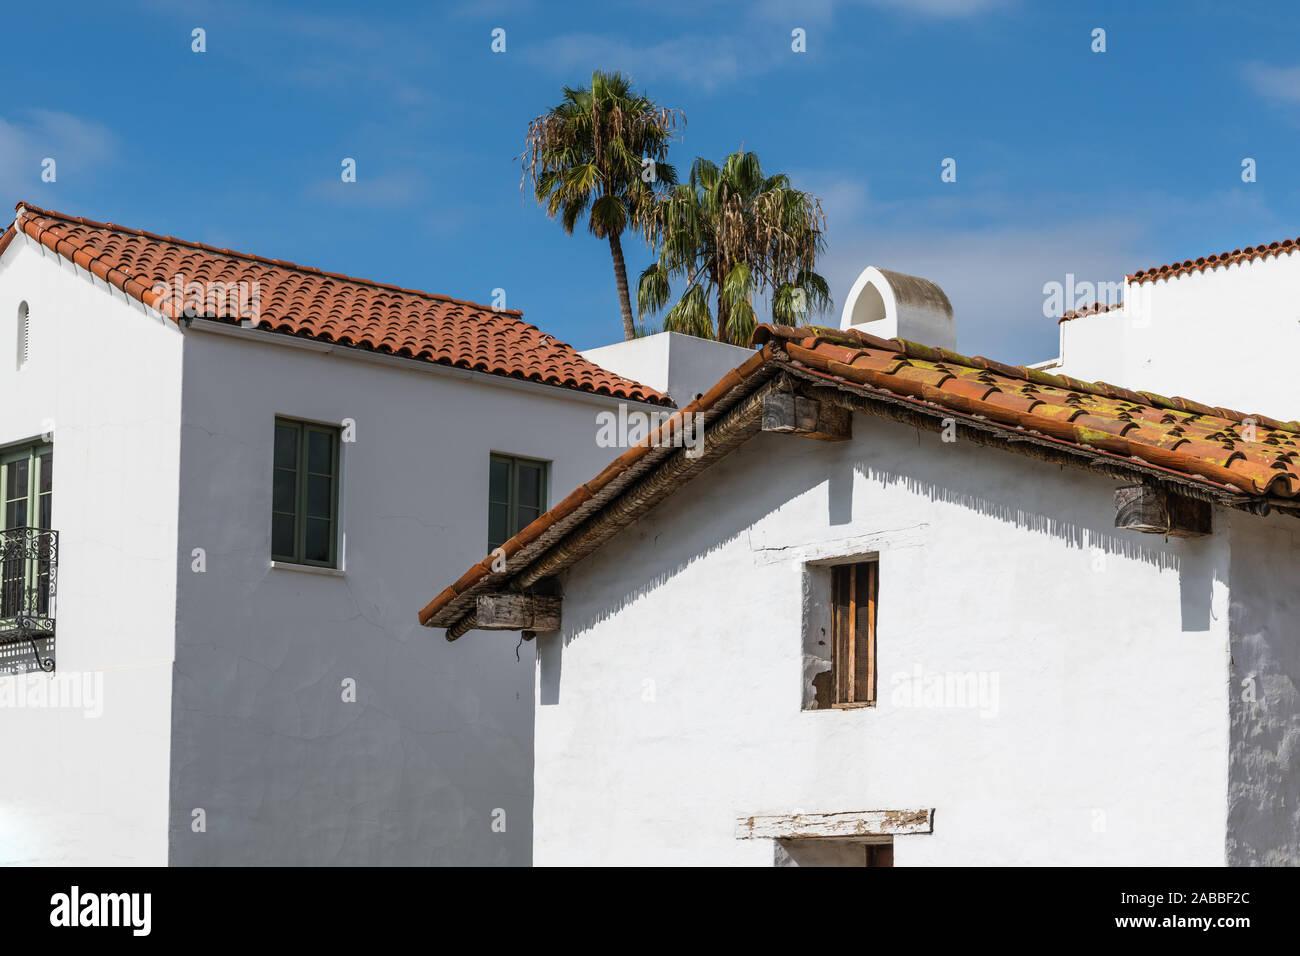 New and old Spanish style buildings with white plaster walls and red tile roofs under a blue sky with palm trees in downtown Santa Barbara, California Stock Photo